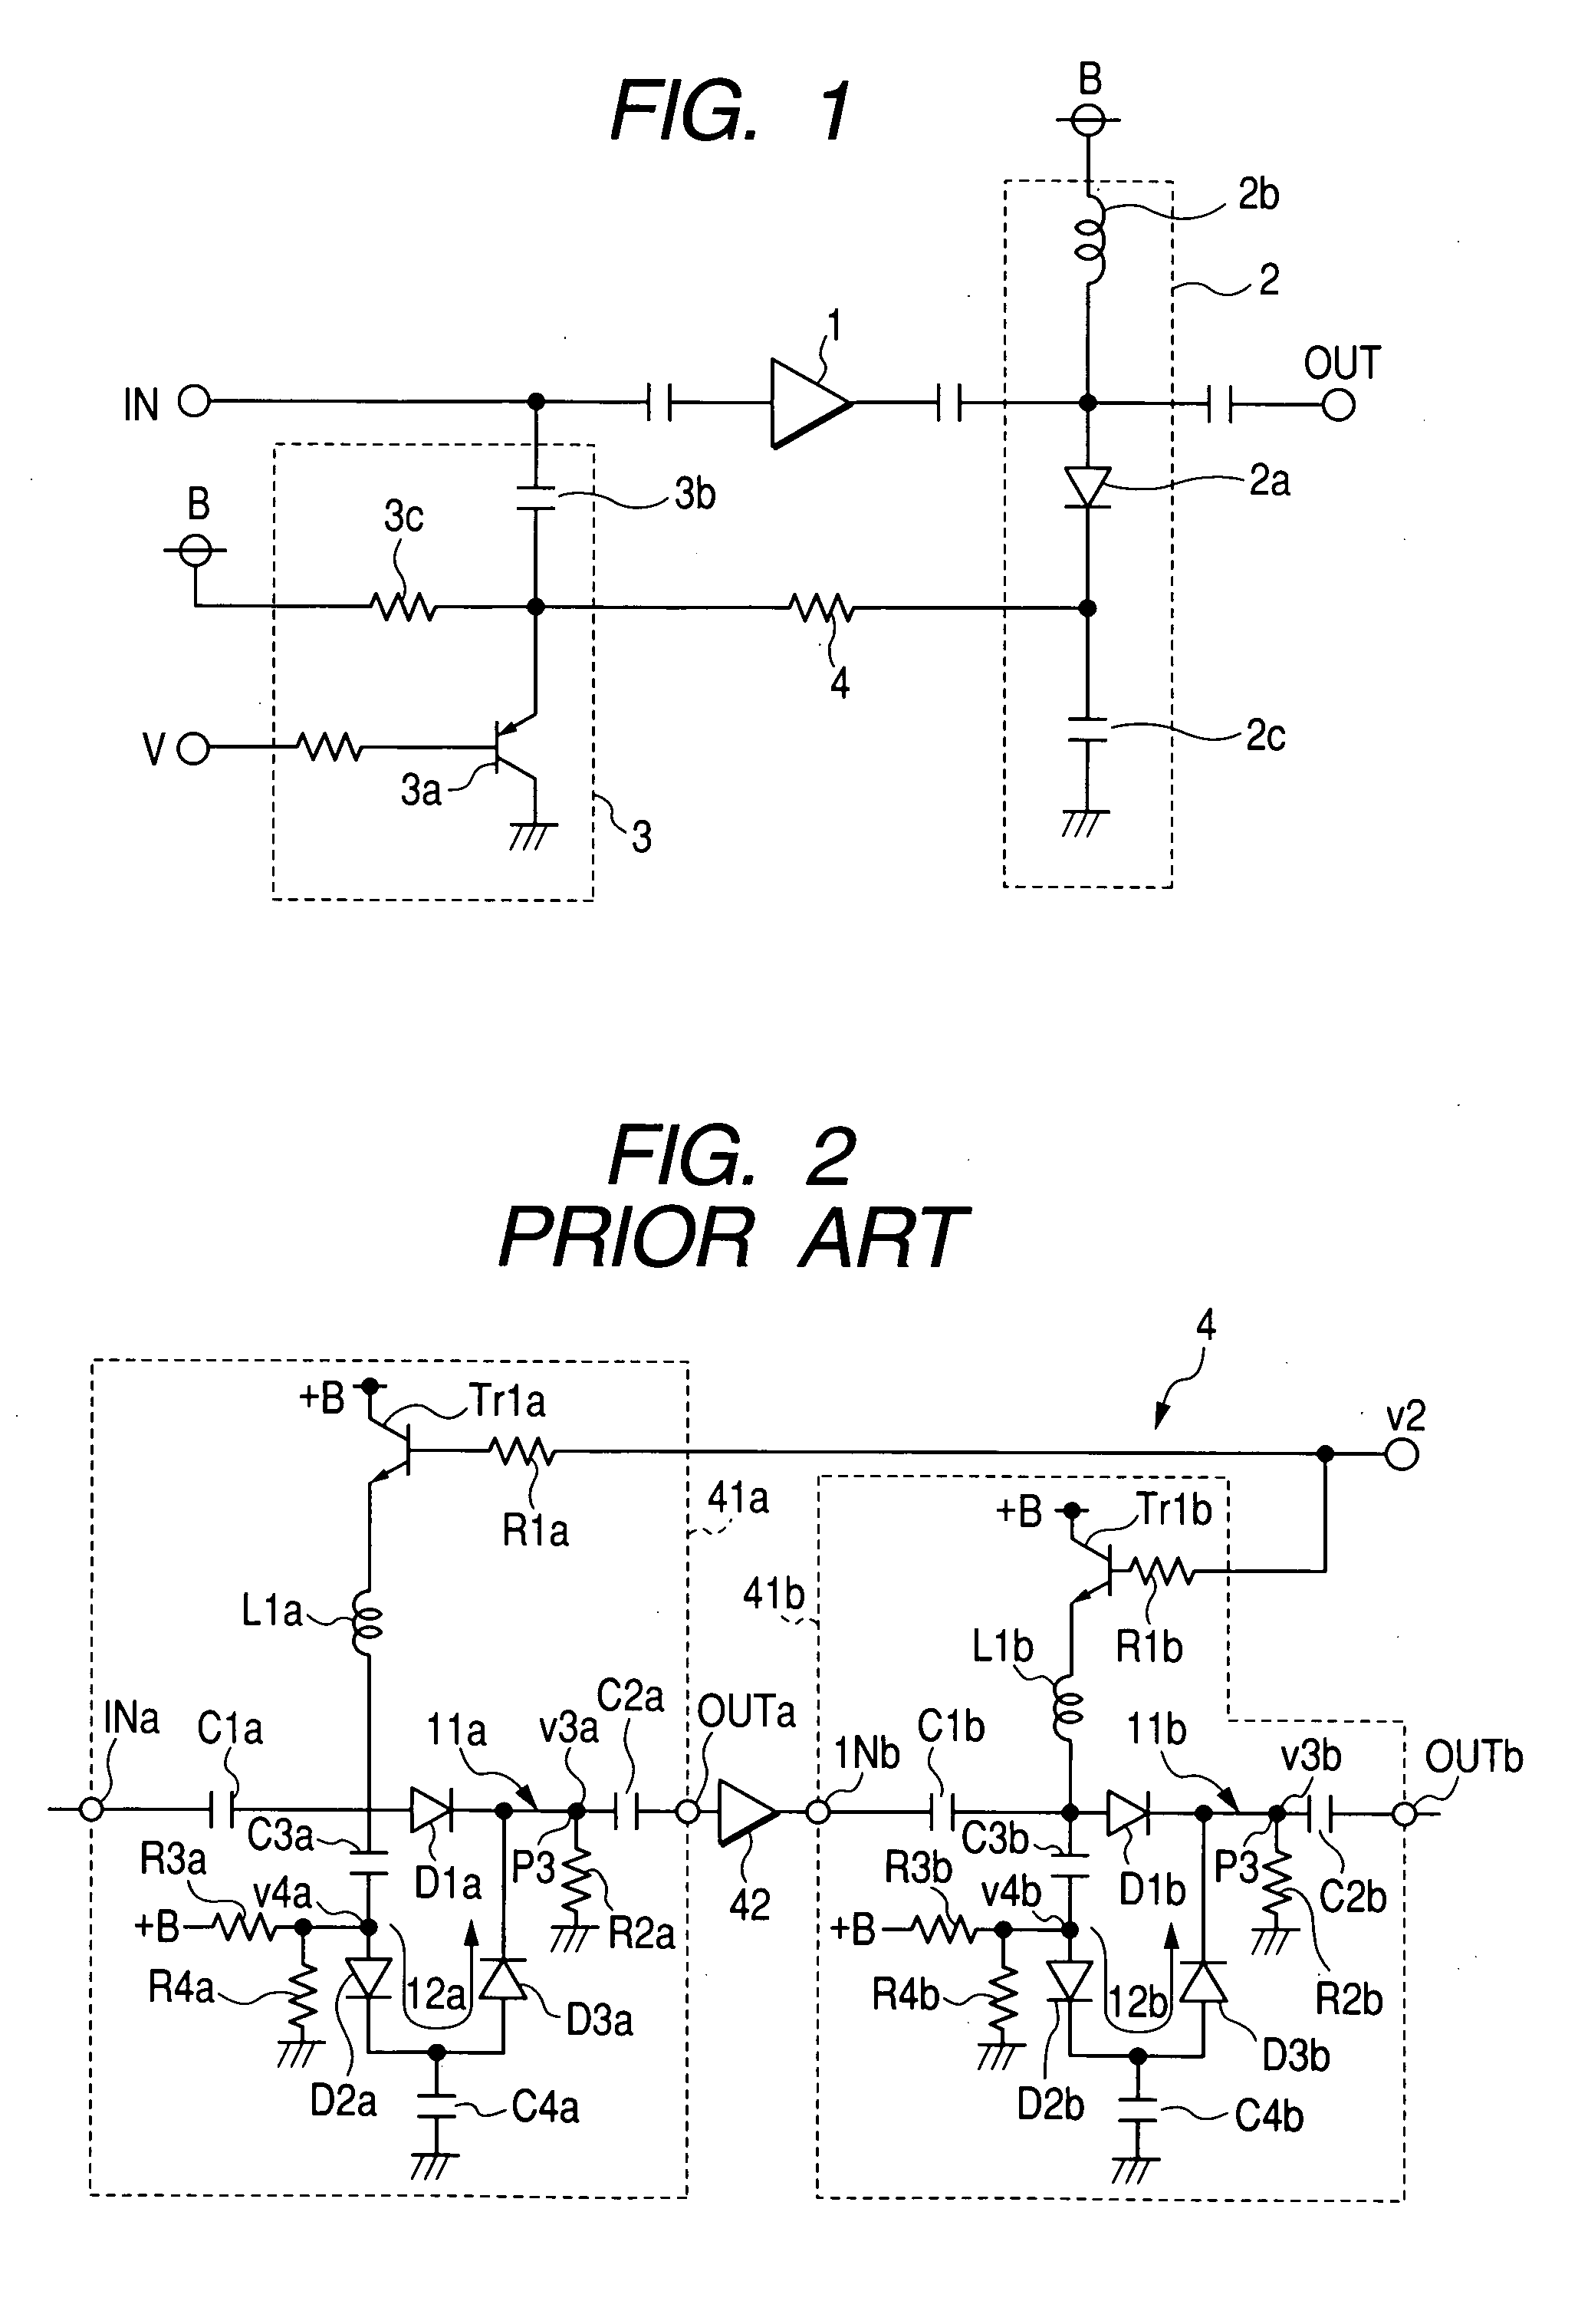 Variable attenuation circuit having large attenuation amount with small circuit size